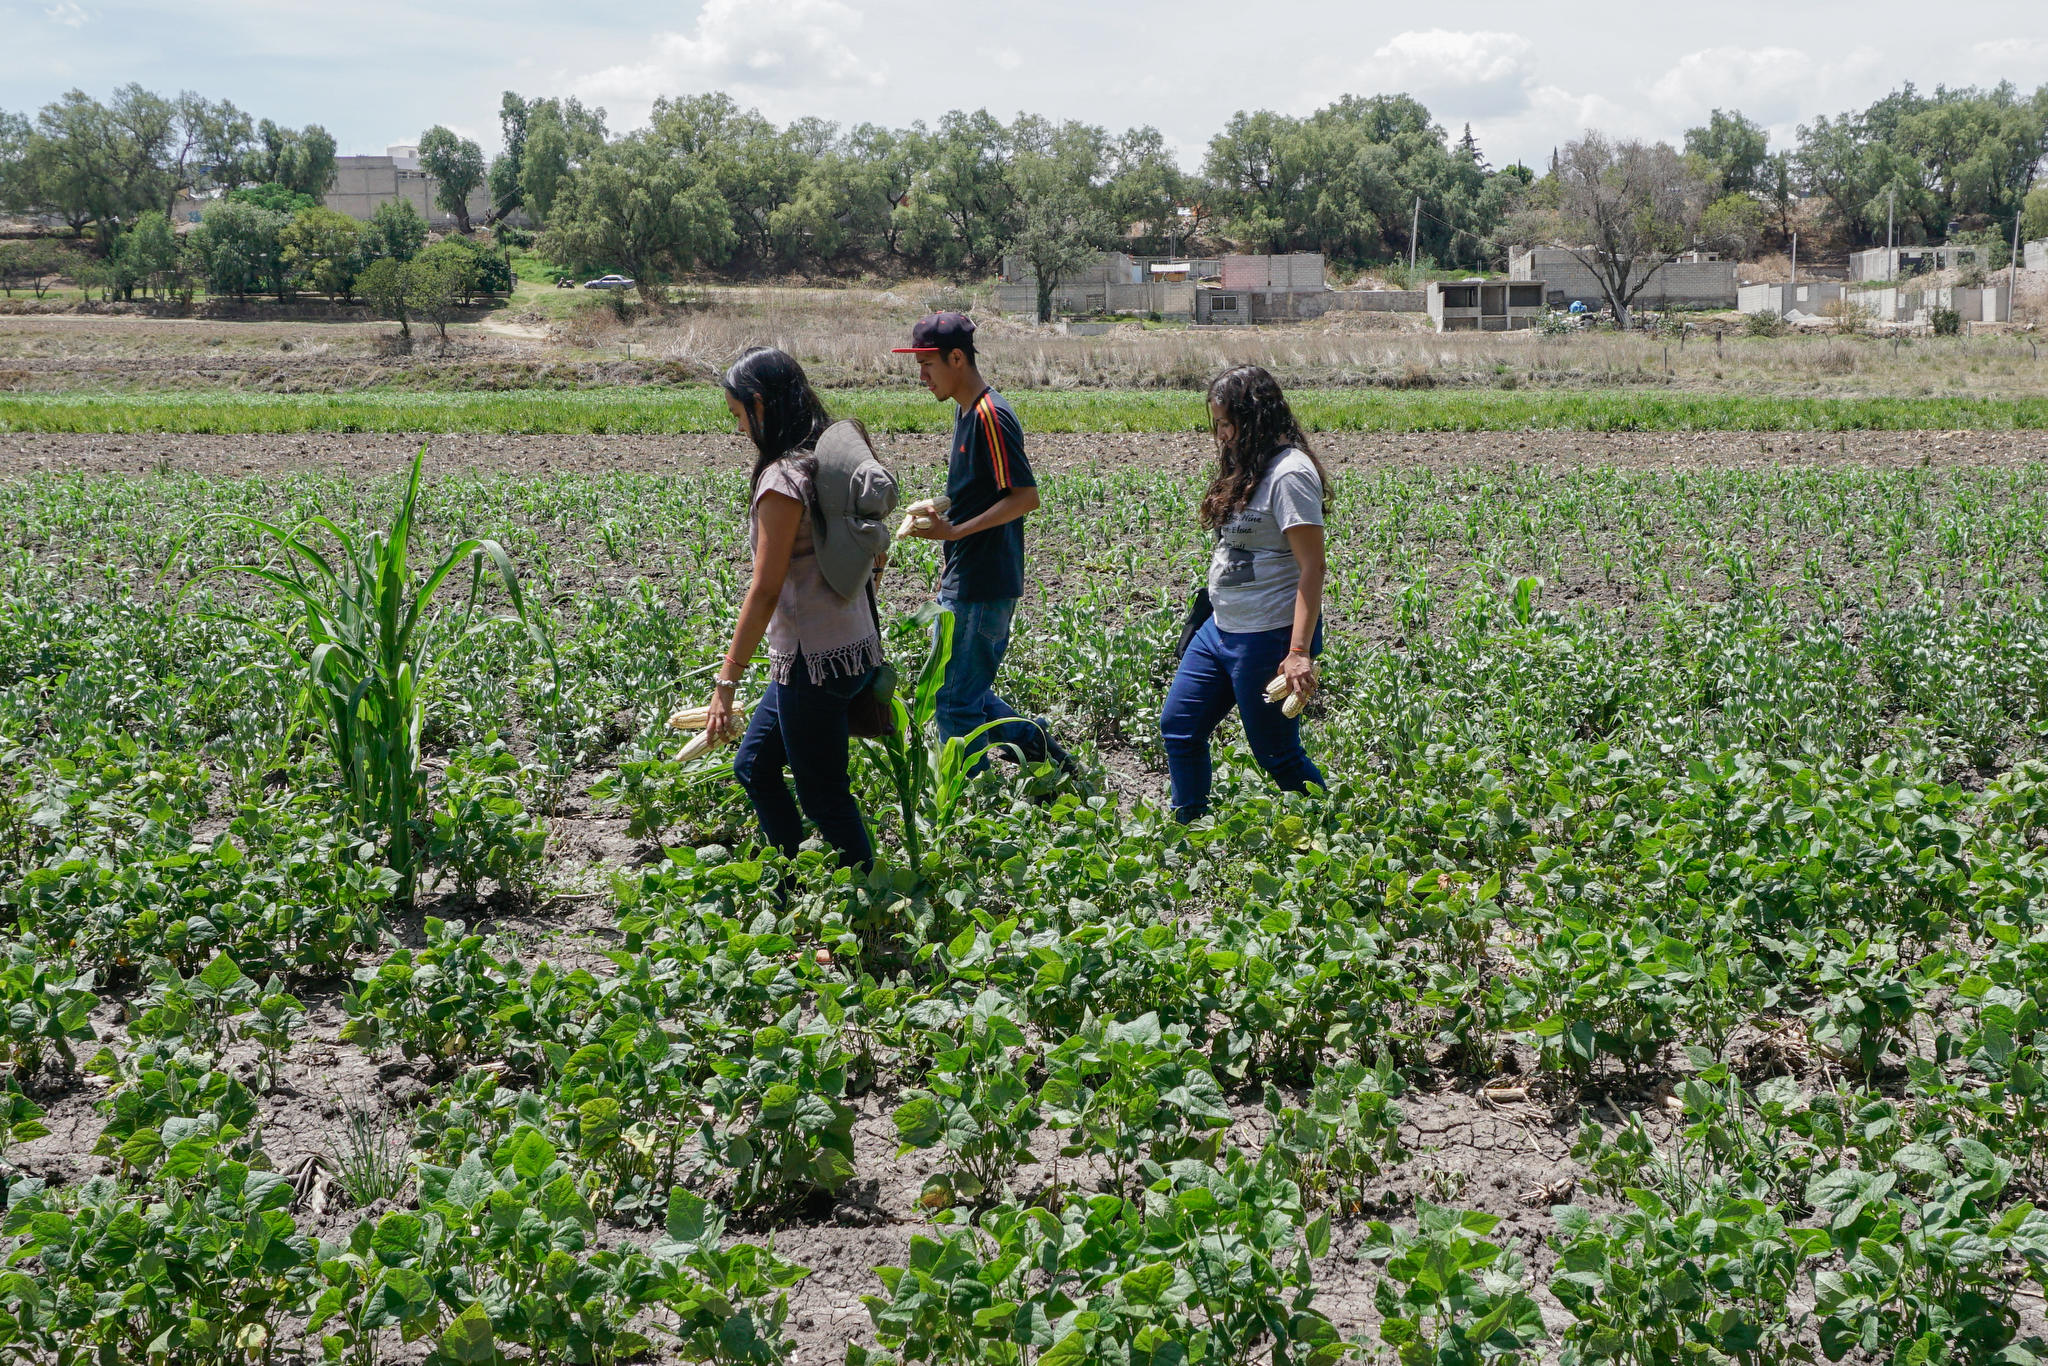 Three people walk through a cornfield in Mexico. The plants are still low to the ground.